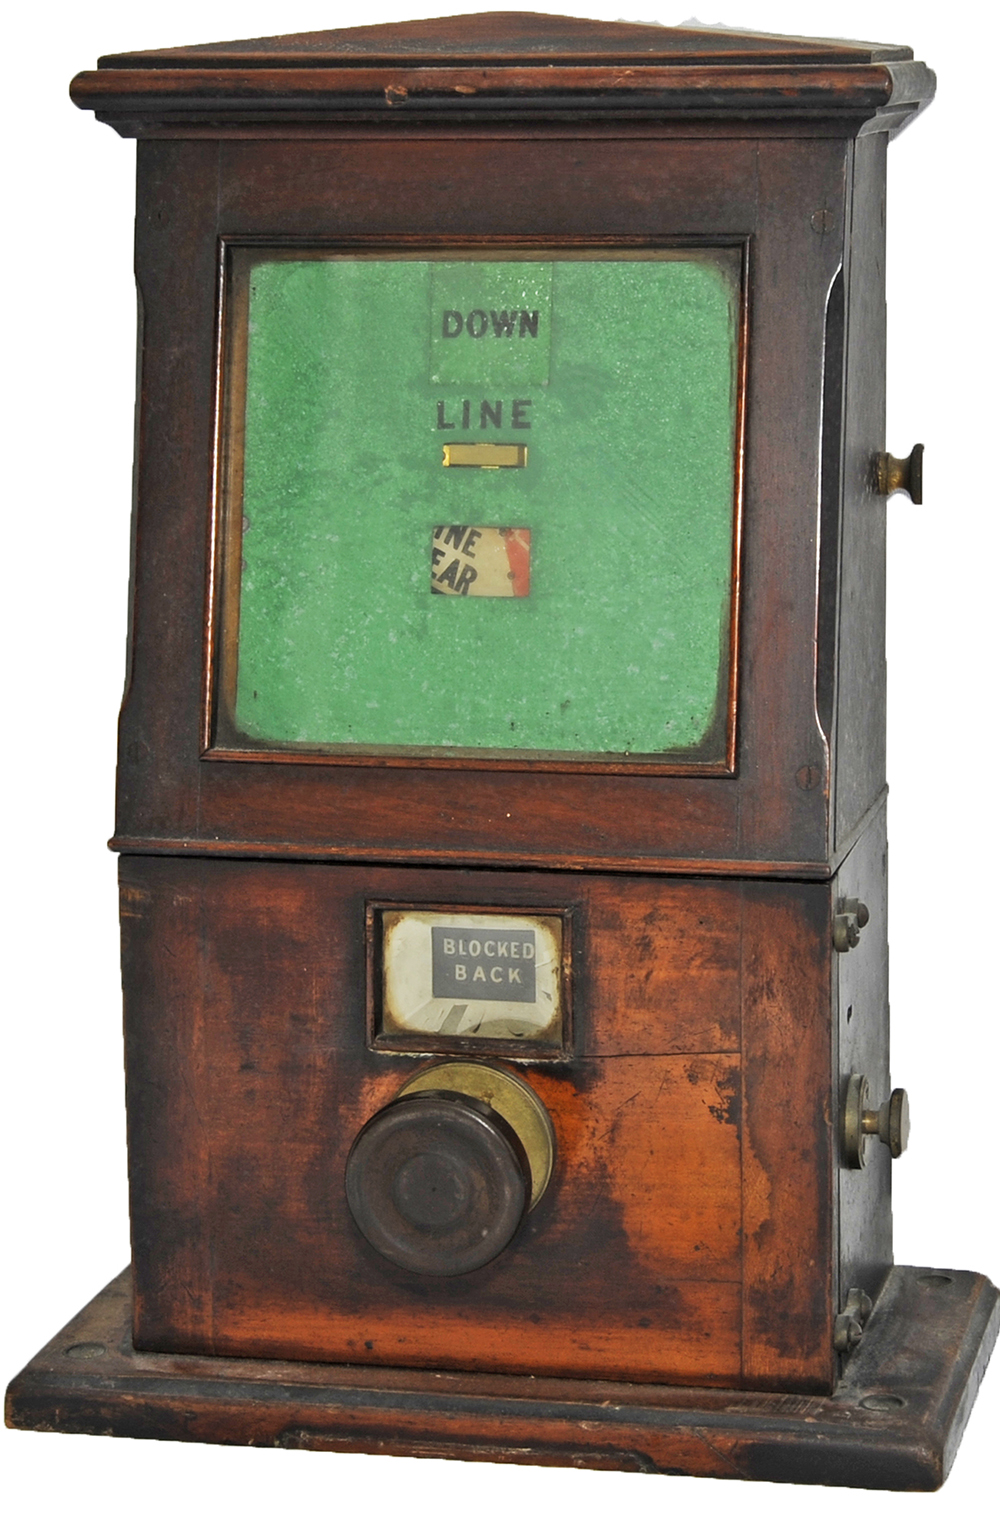 GWR Tyers Permissive Block Instrument with sloping face and indicator window above the rotary knob.